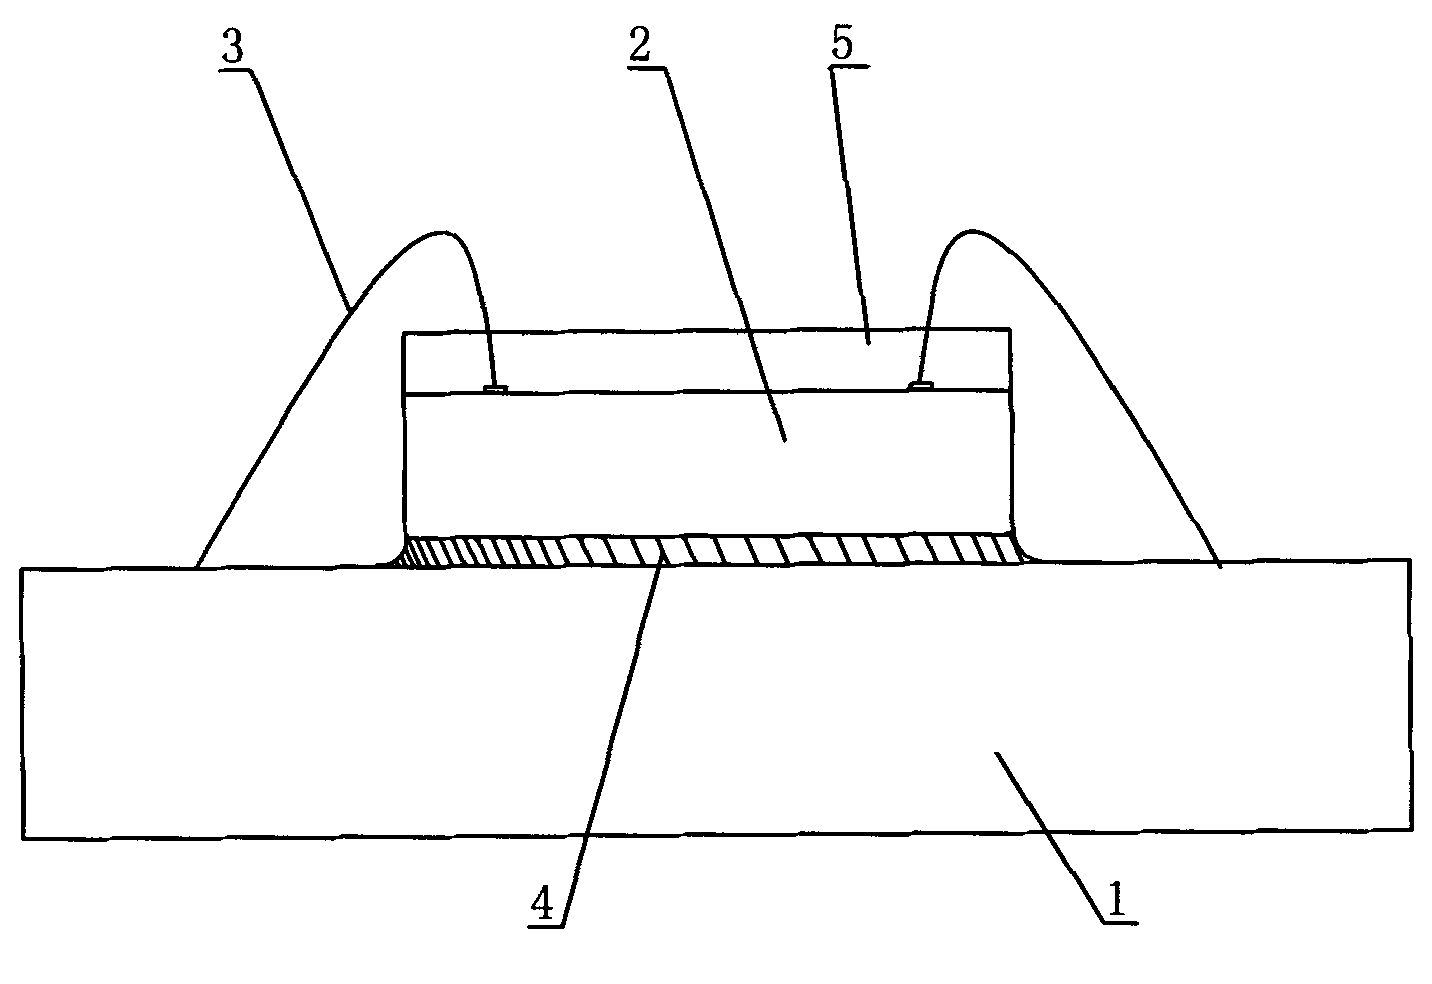 Multipoint dispensing process and LED (light emitting diode) device